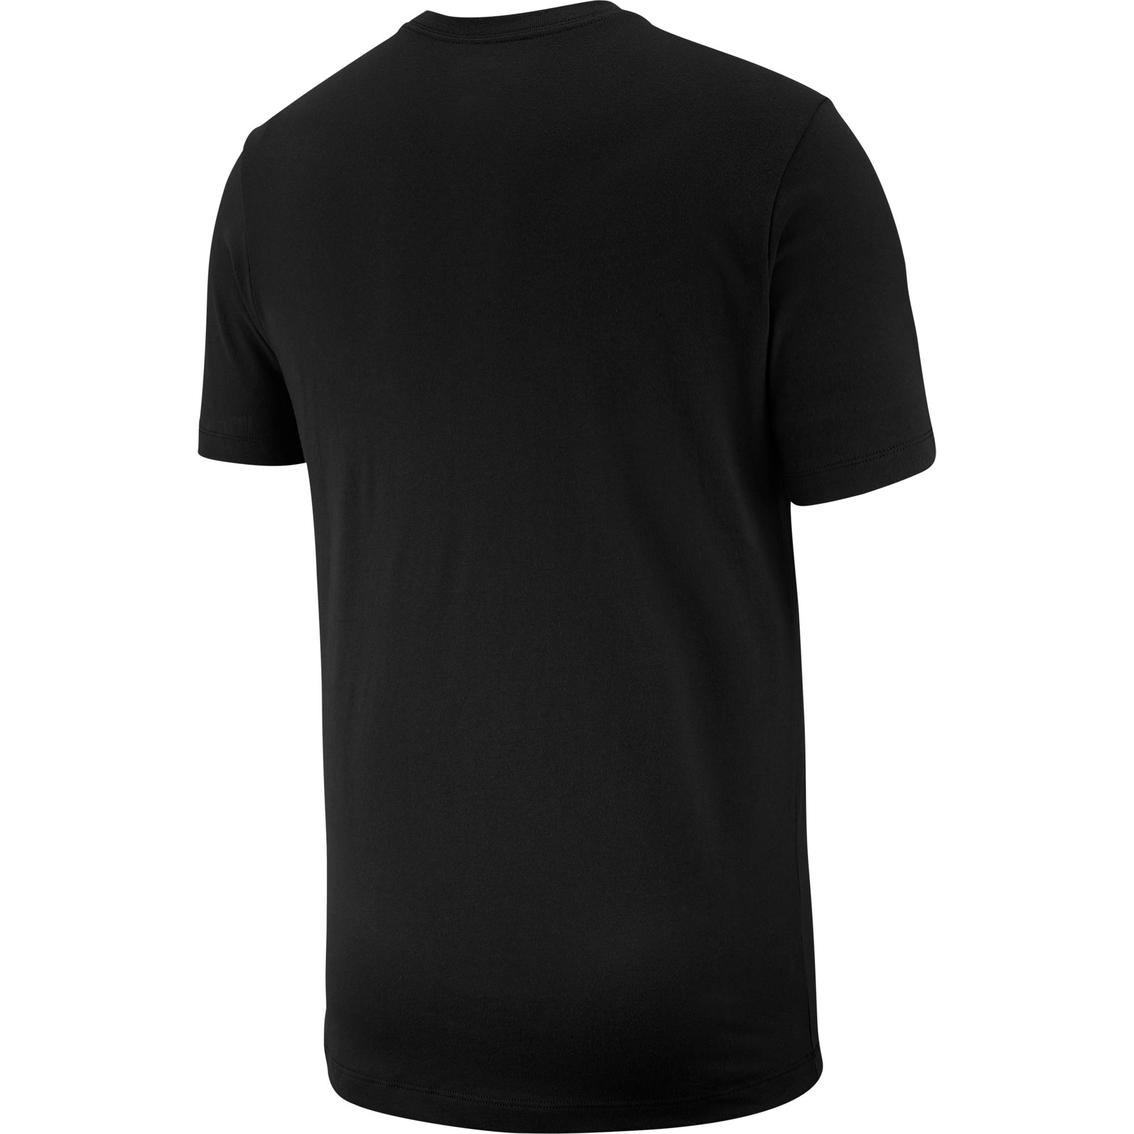 Nike Dry Just Do It Basketball Tee - Image 2 of 2